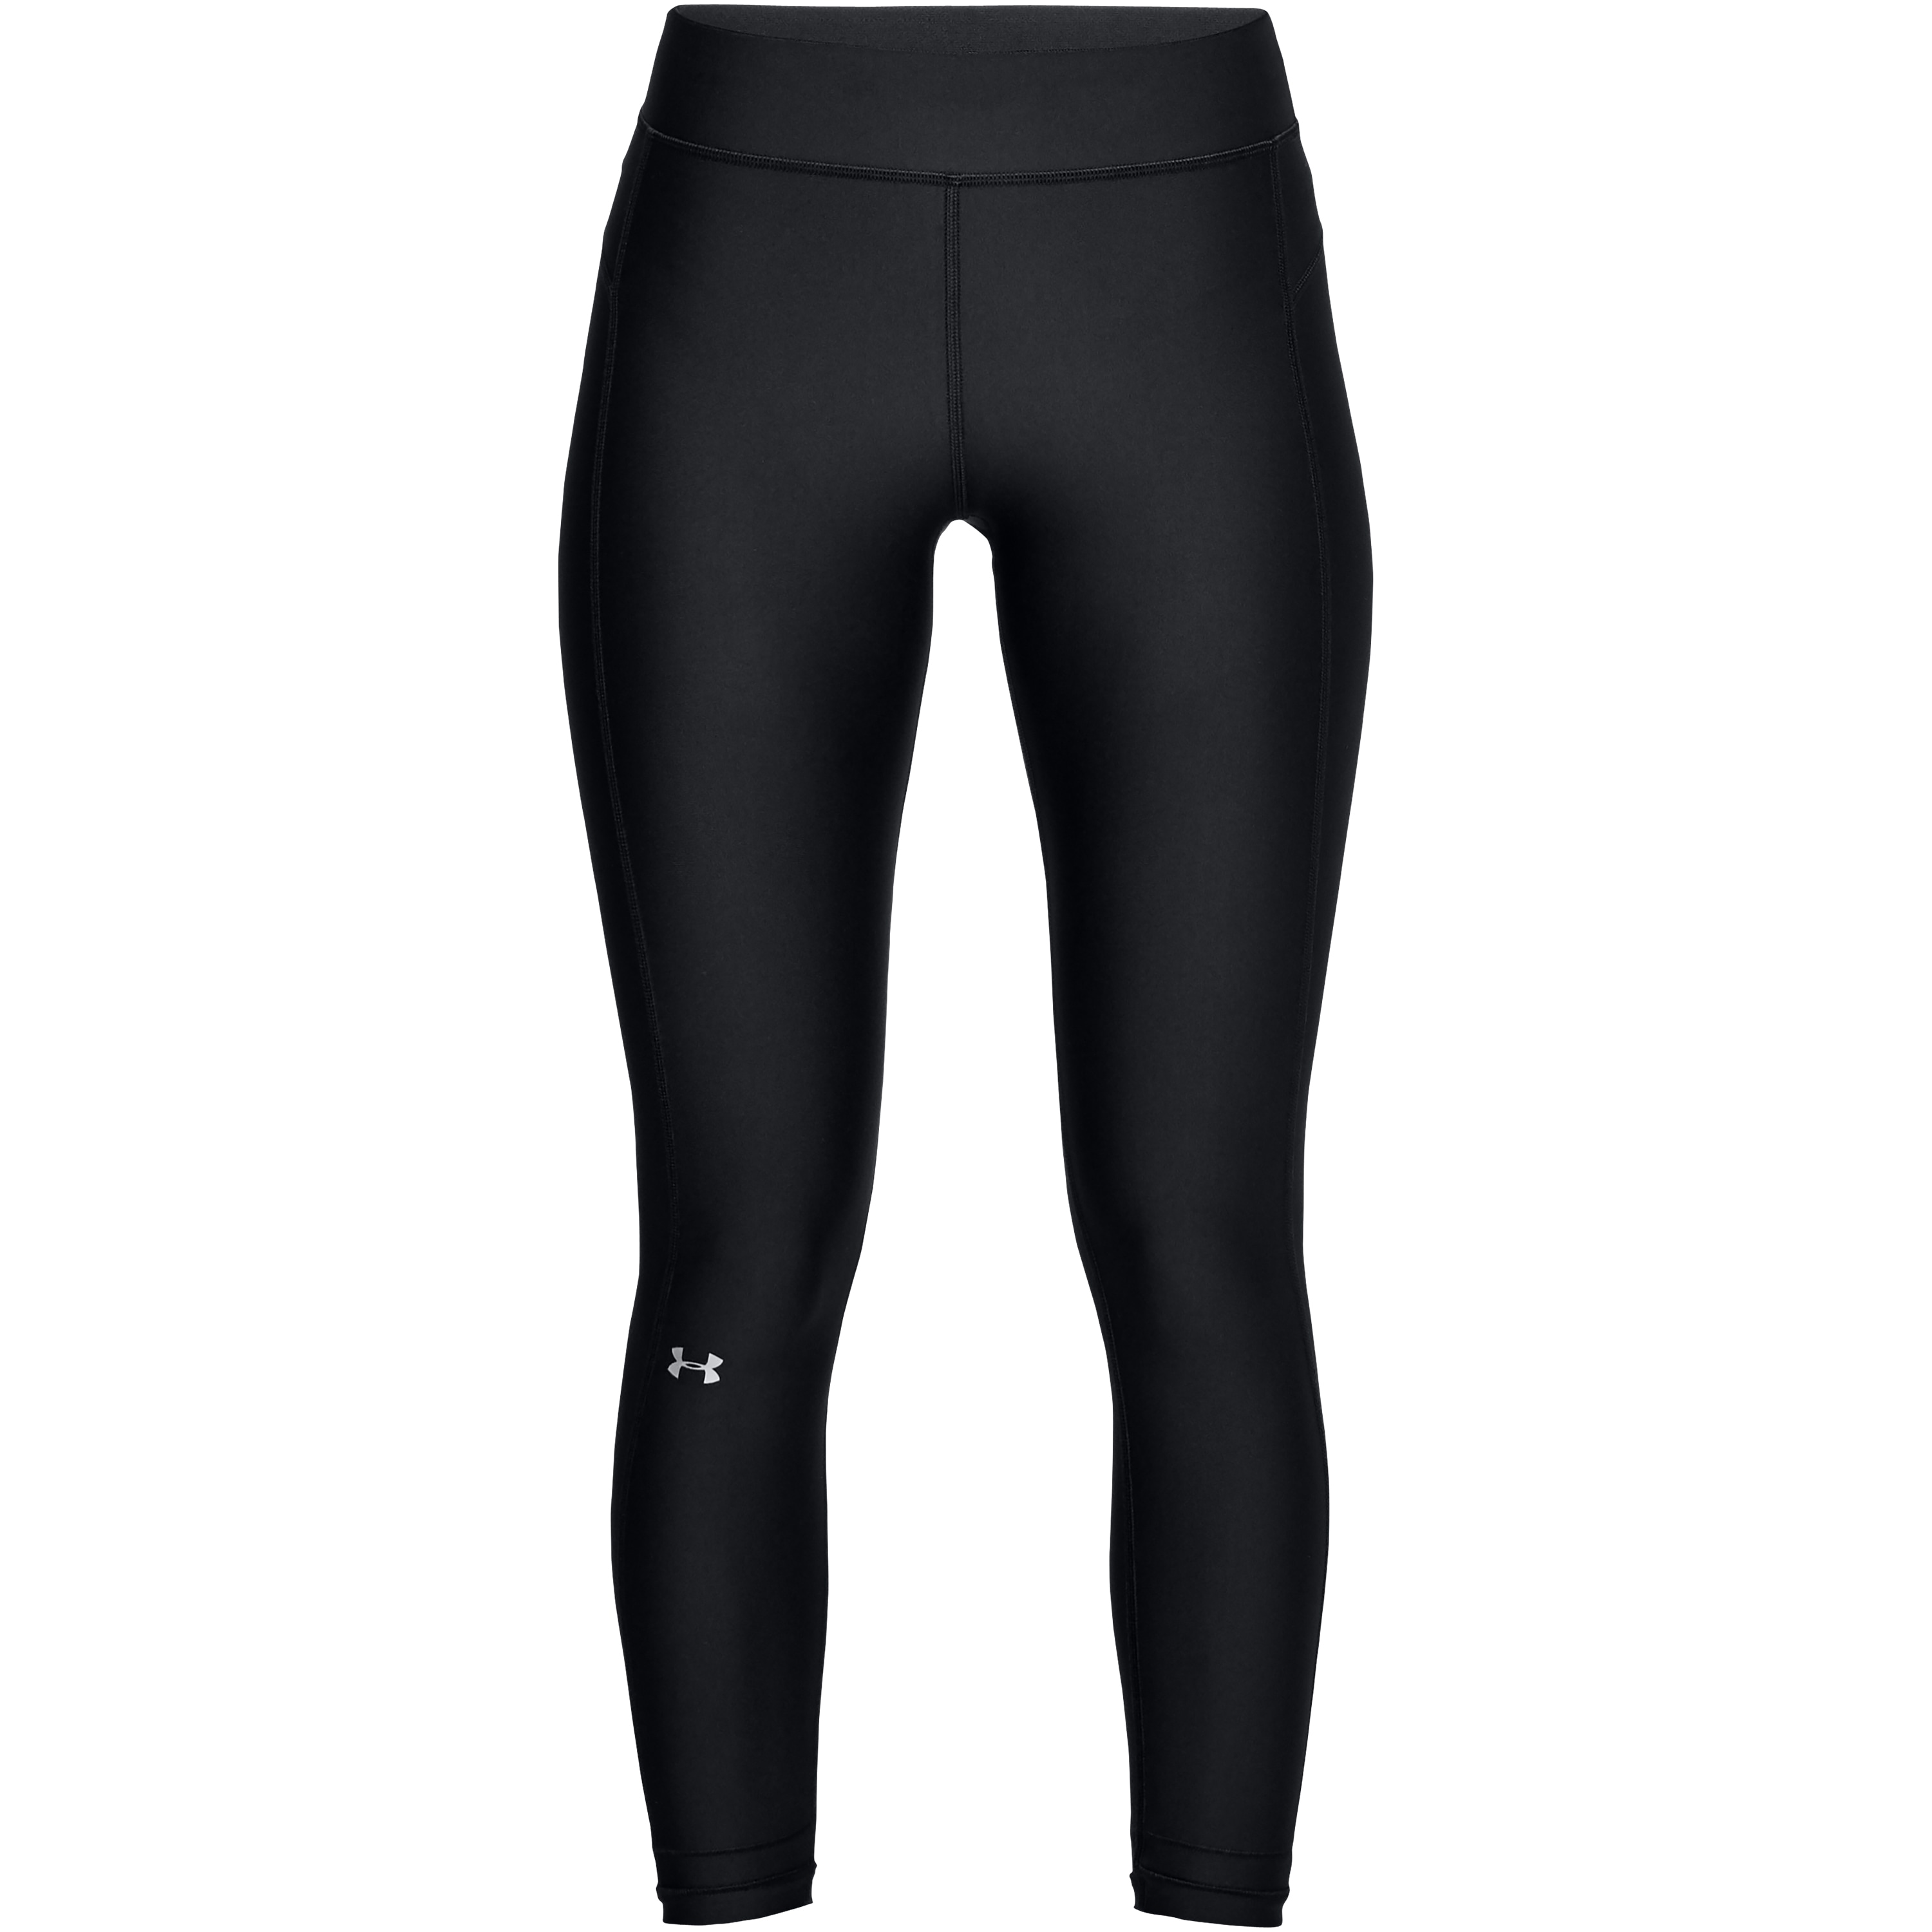 Purchase the Under Armour Women Jogging Pants Ankle Crop black b